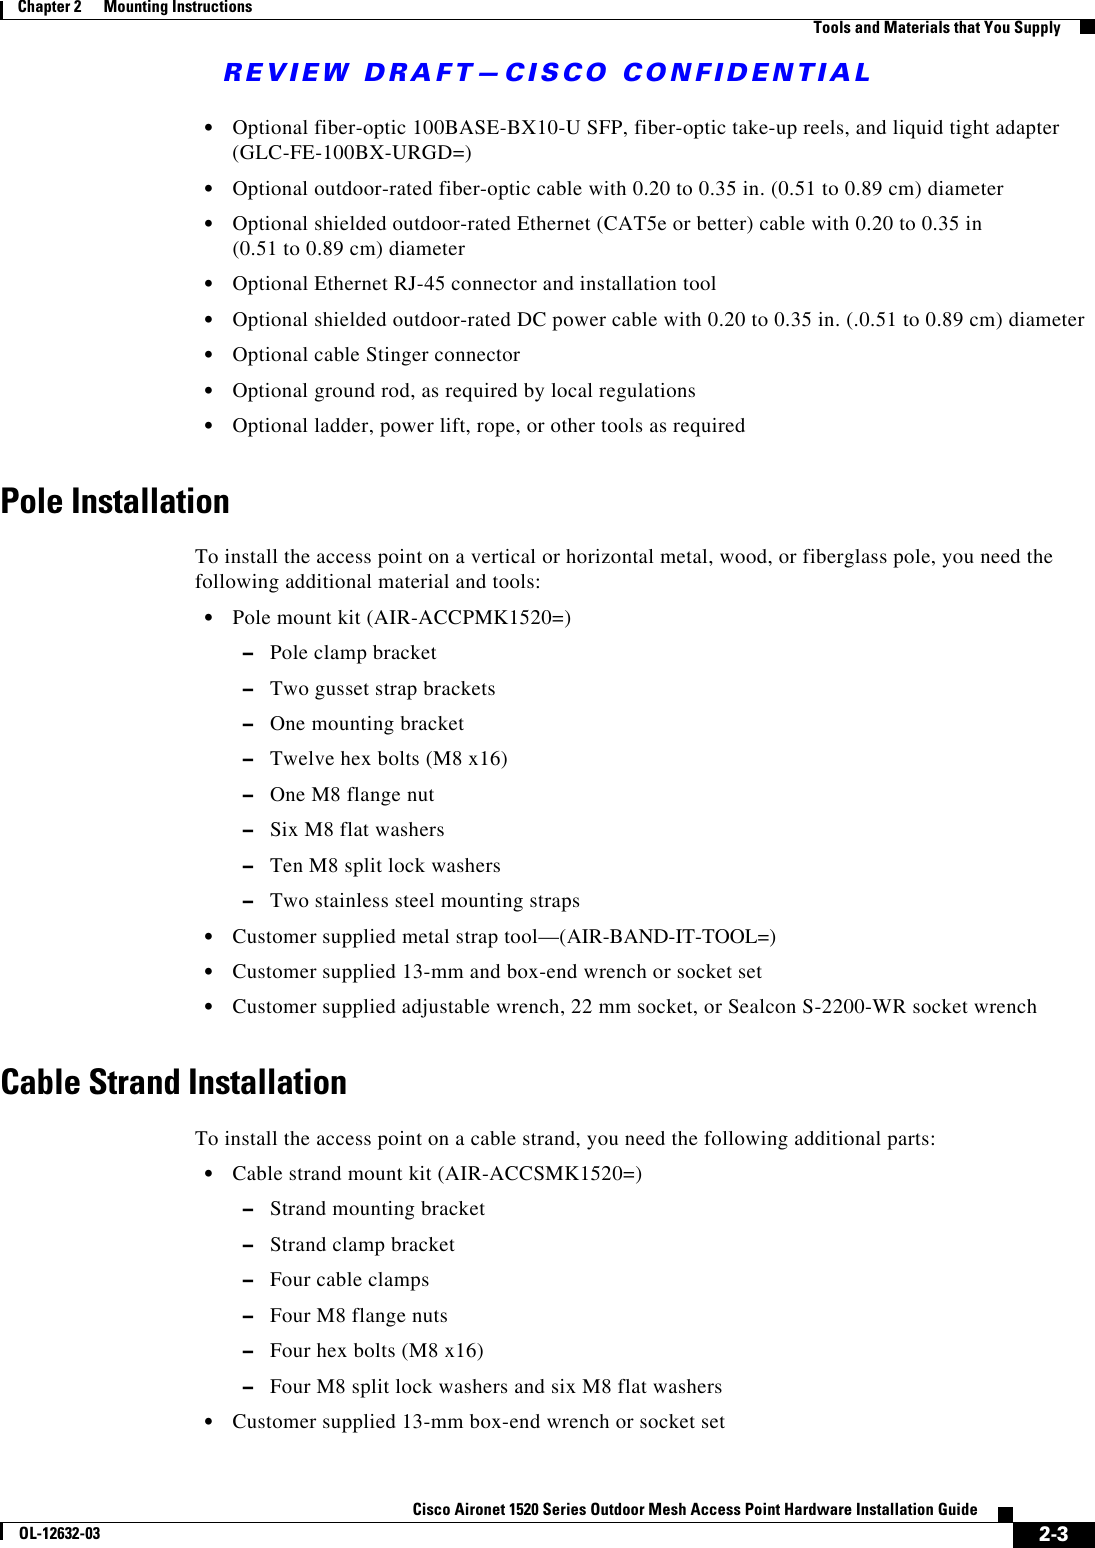 REVIEW DRAFT—CISCO CONFIDENTIAL2-3Cisco Aironet 1520 Series Outdoor Mesh Access Point Hardware Installation GuideOL-12632-03Chapter 2      Mounting Instructions  Tools and Materials that You Supply  • Optional fiber-optic 100BASE-BX10-U SFP, fiber-optic take-up reels, and liquid tight adapter (GLC-FE-100BX-URGD=)  • Optional outdoor-rated fiber-optic cable with 0.20 to 0.35 in. (0.51 to 0.89 cm) diameter  • Optional shielded outdoor-rated Ethernet (CAT5e or better) cable with 0.20 to 0.35 in  (0.51 to 0.89 cm) diameter  • Optional Ethernet RJ-45 connector and installation tool  • Optional shielded outdoor-rated DC power cable with 0.20 to 0.35 in. (.0.51 to 0.89 cm) diameter  • Optional cable Stinger connector  • Optional ground rod, as required by local regulations  • Optional ladder, power lift, rope, or other tools as requiredPole InstallationTo install the access point on a vertical or horizontal metal, wood, or fiberglass pole, you need the following additional material and tools:  • Pole mount kit (AIR-ACCPMK1520=)  –Pole clamp bracket  –Two gusset strap brackets  –One mounting bracket  –Twelve hex bolts (M8 x16)  –One M8 flange nut  –Six M8 flat washers  –Ten M8 split lock washers  –Two stainless steel mounting straps  • Customer supplied metal strap tool—(AIR-BAND-IT-TOOL=)  • Customer supplied 13-mm and box-end wrench or socket set  • Customer supplied adjustable wrench, 22 mm socket, or Sealcon S-2200-WR socket wrench Cable Strand InstallationTo install the access point on a cable strand, you need the following additional parts:  • Cable strand mount kit (AIR-ACCSMK1520=)   –Strand mounting bracket  –Strand clamp bracket  –Four cable clamps  –Four M8 flange nuts   –Four hex bolts (M8 x16)  –Four M8 split lock washers and six M8 flat washers  • Customer supplied 13-mm box-end wrench or socket set